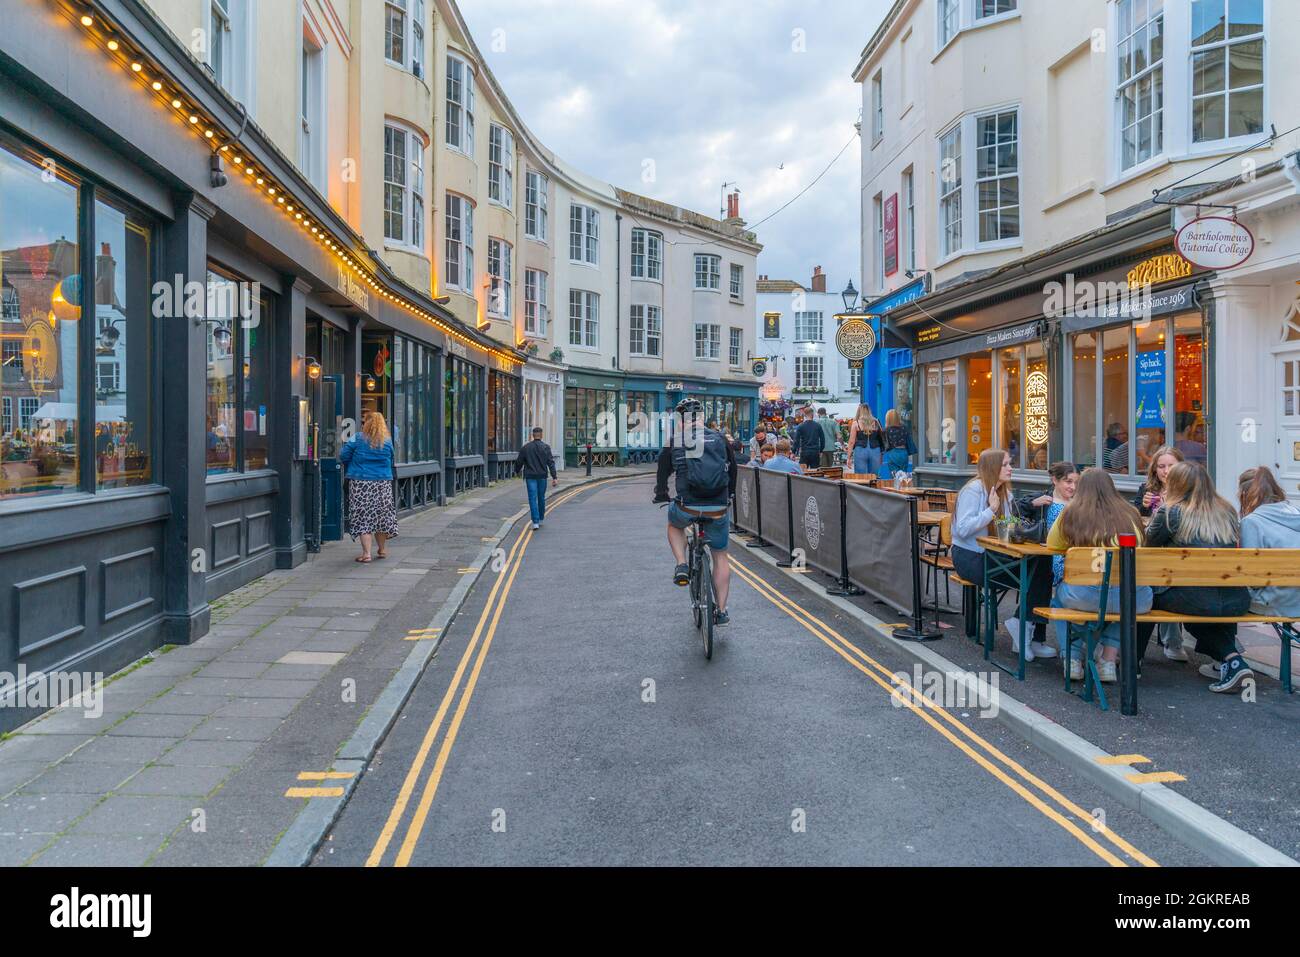 View of cafes and restaurants, Alfresco dining in The Lanes at dusk, Brighton, Sussex, England, United Kingdom, Europe Stock Photo